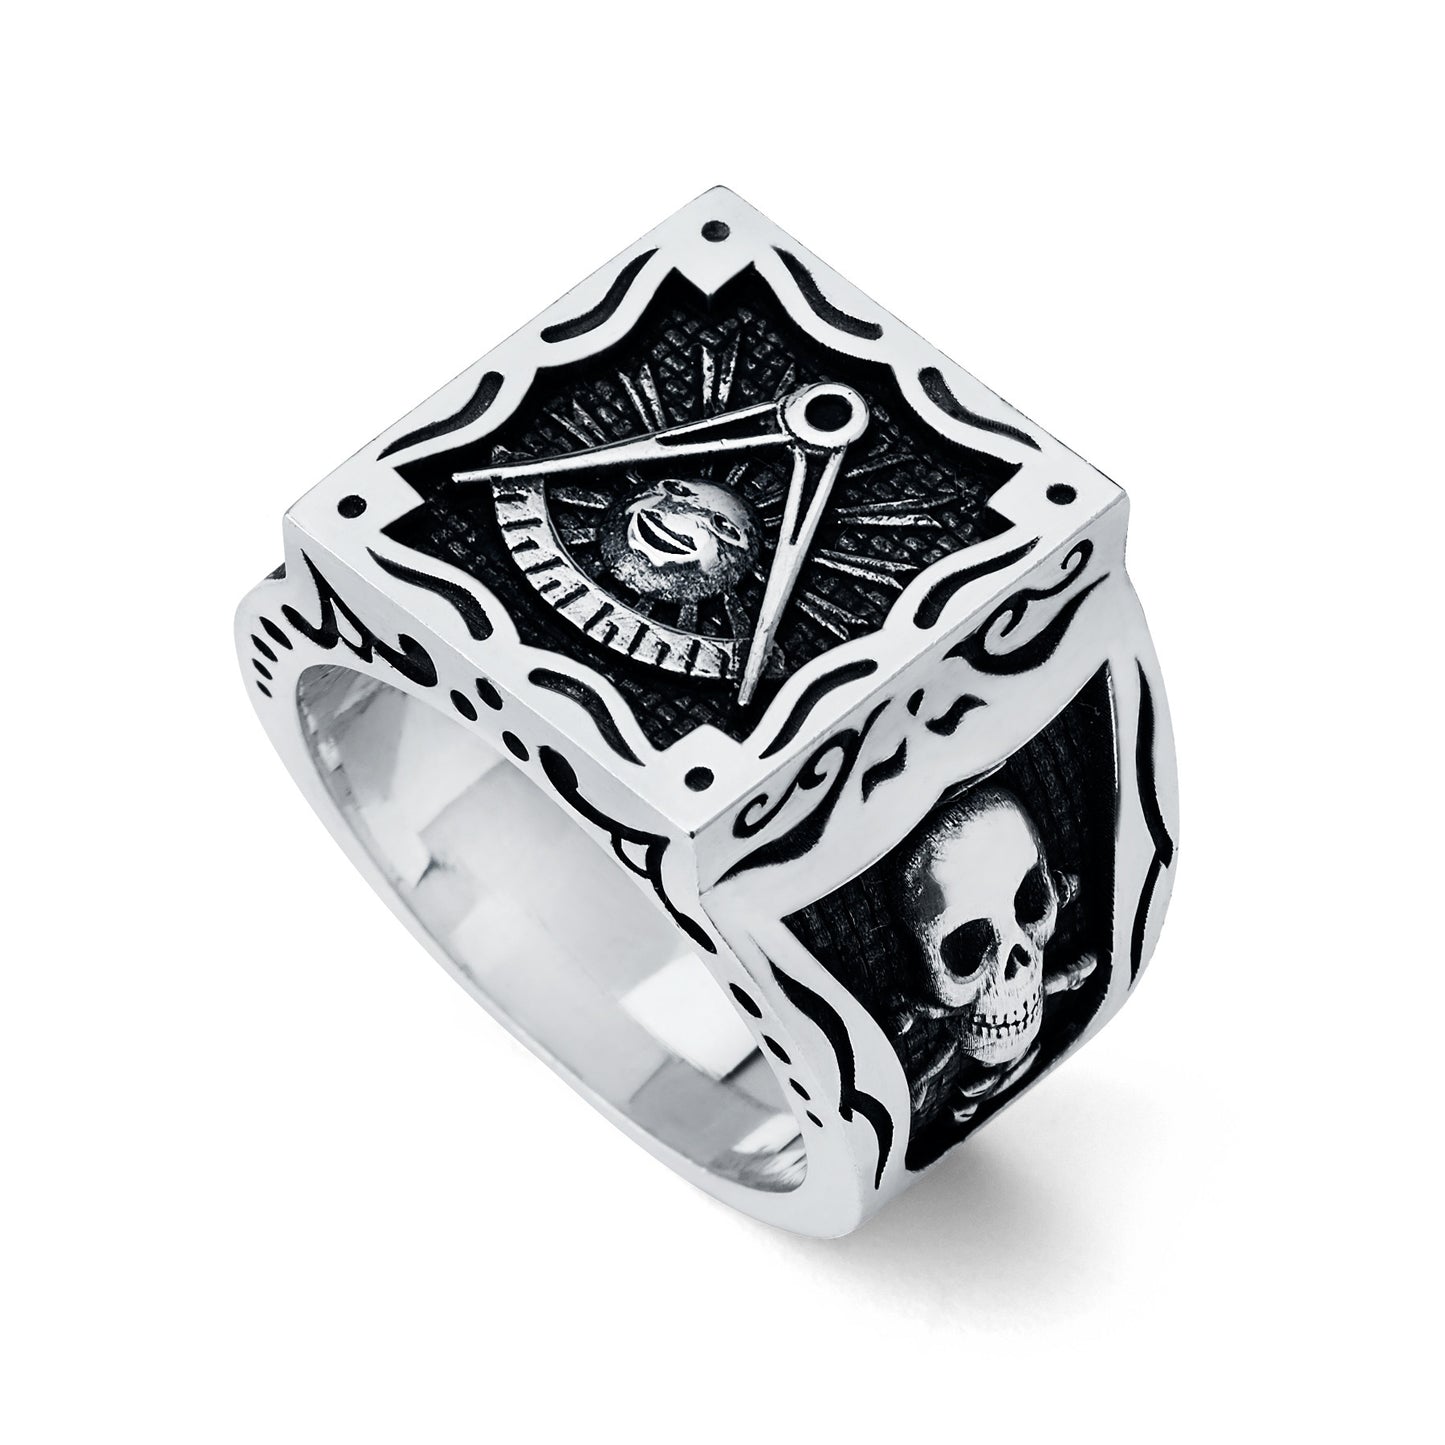 Past Master Ring, Gothic Square Ring (Large)